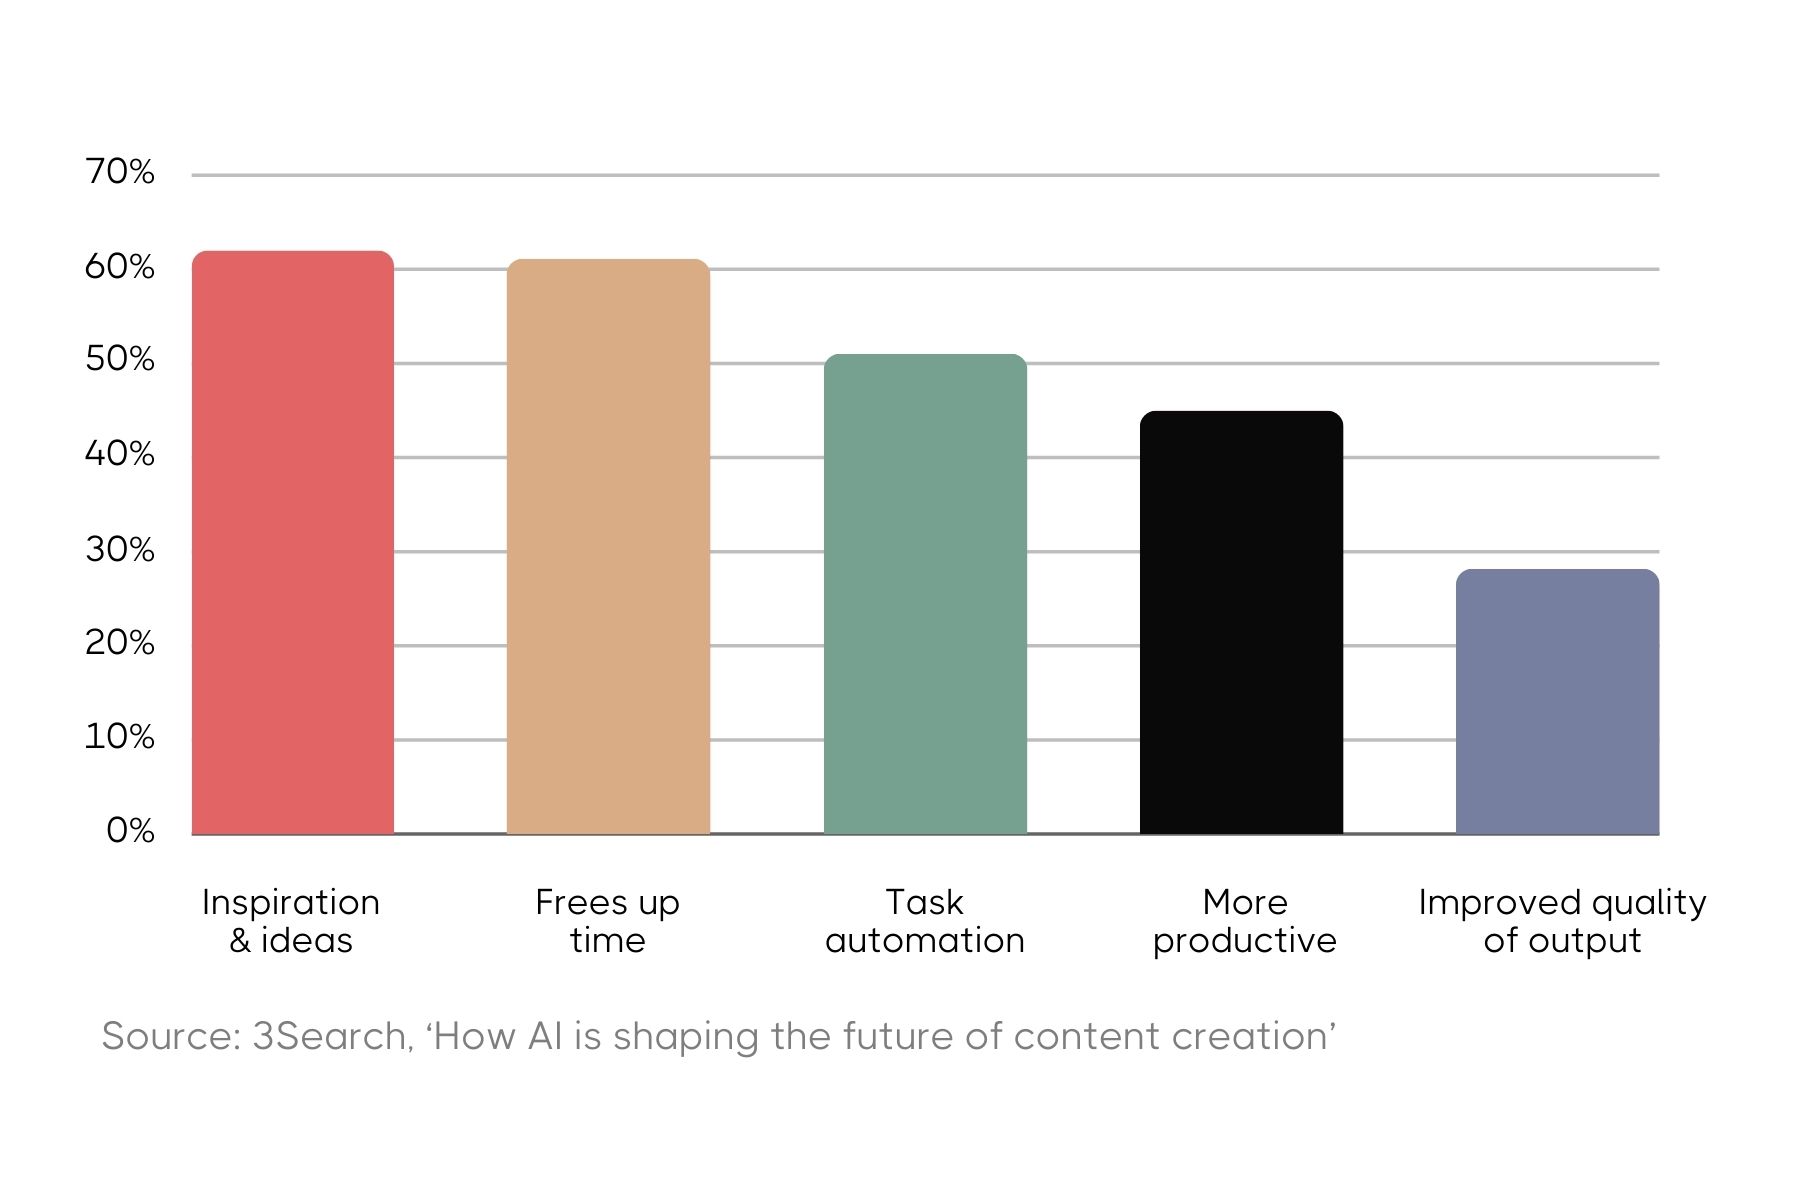 Bar graph depicting the perceived benefits of AI in content creation. The bars represent different advantages: 'Inspiration & ideas' at 60% in red, 'Frees up time' at around 50% in tan, 'Task automation' at 45% in green, 'More productive' at 40% in black, and 'Improved quality of output' at 35% in blue. These percentages reflect survey results sourced from 3Search's report on 'How AI is shaping the future of content creation'.